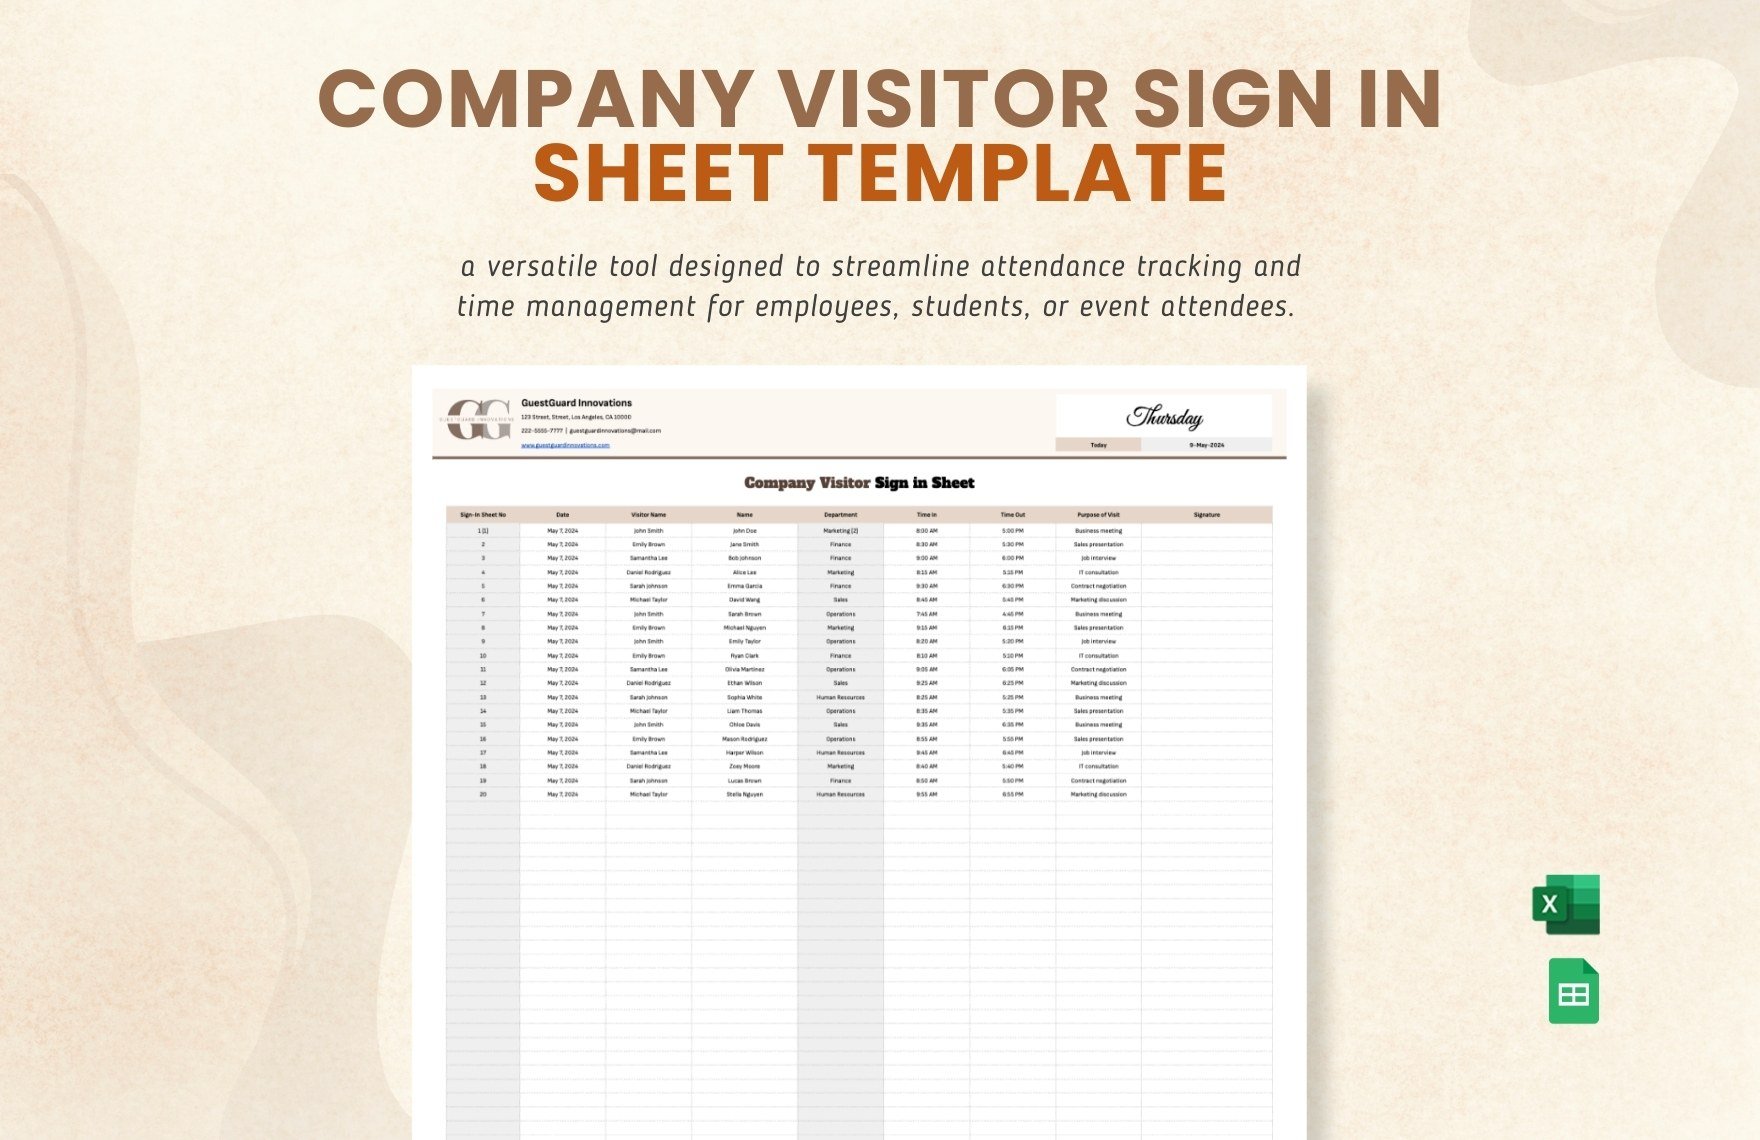 Company Visitor Sign in Sheet Template in Excel, Google Sheets